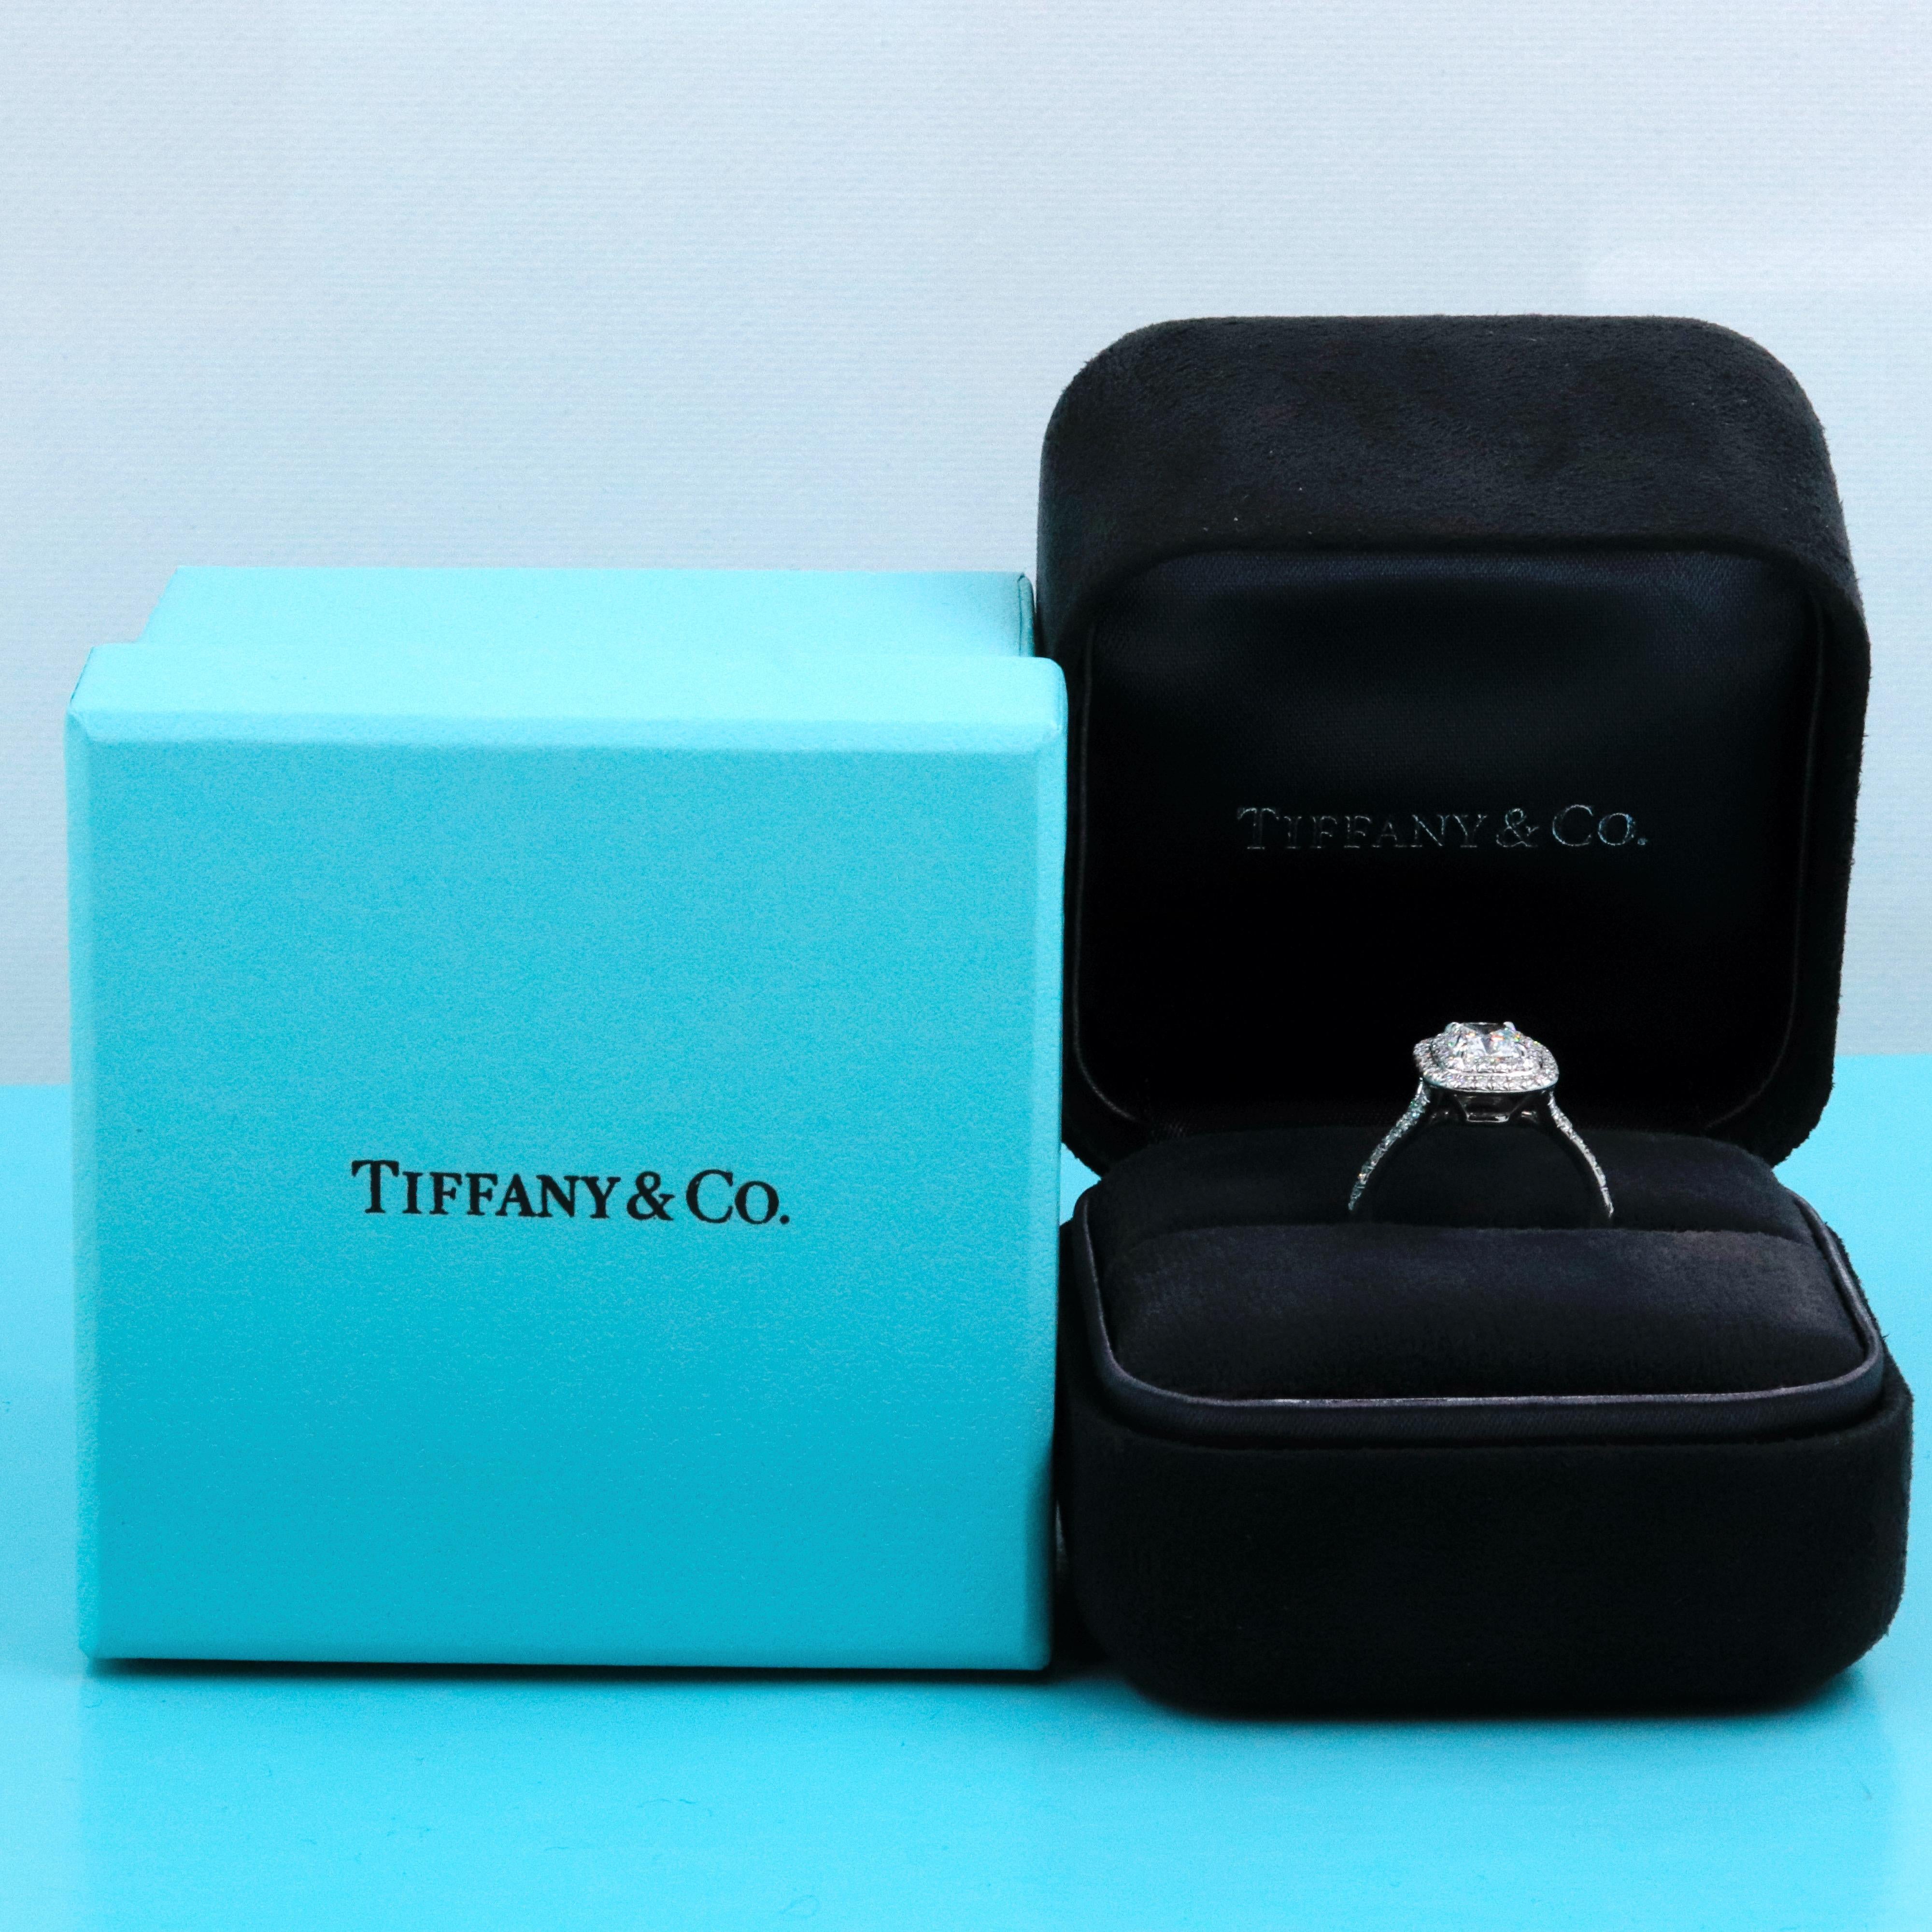 Tiffany & Co.

Style:  Soleste Double Halo  Engagement Ring
Metal:  Platinum
Size:  5 sizable
TCW:  1.30 tcw
Main Diamond:  Cushion Modified Brilliant 0.95 cts 
Color & Clarity:  G - VS1
Accent Diamonds:   2 Rows Round Brilliant Diamonds 0.35 tcw D